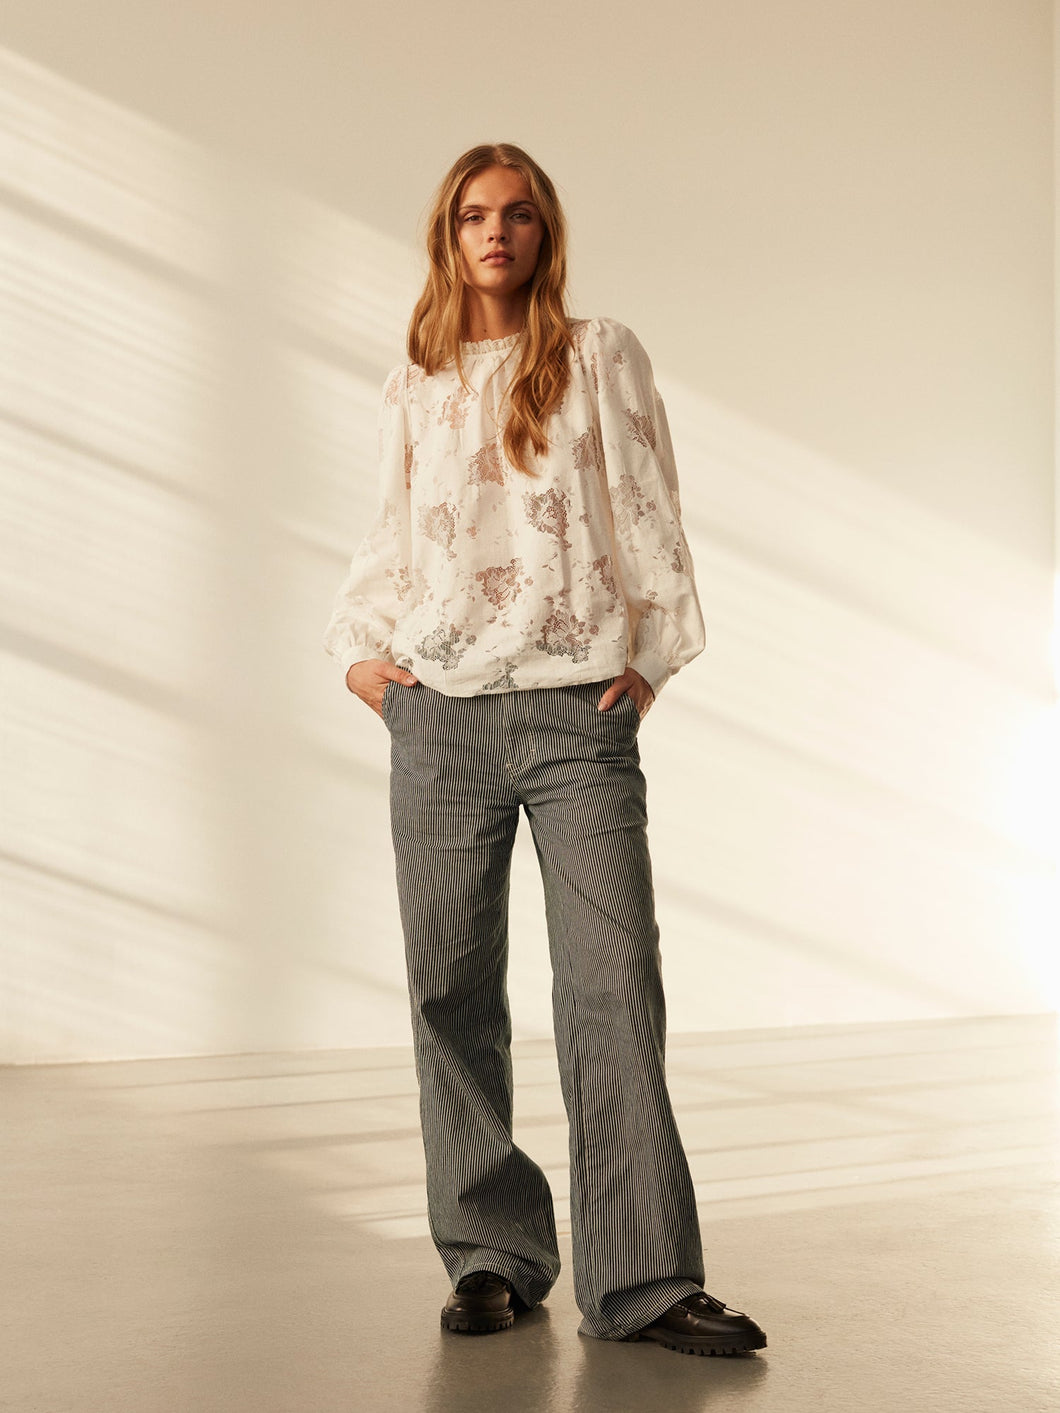 Sofie Schnoor Lace Flower Blouse - White